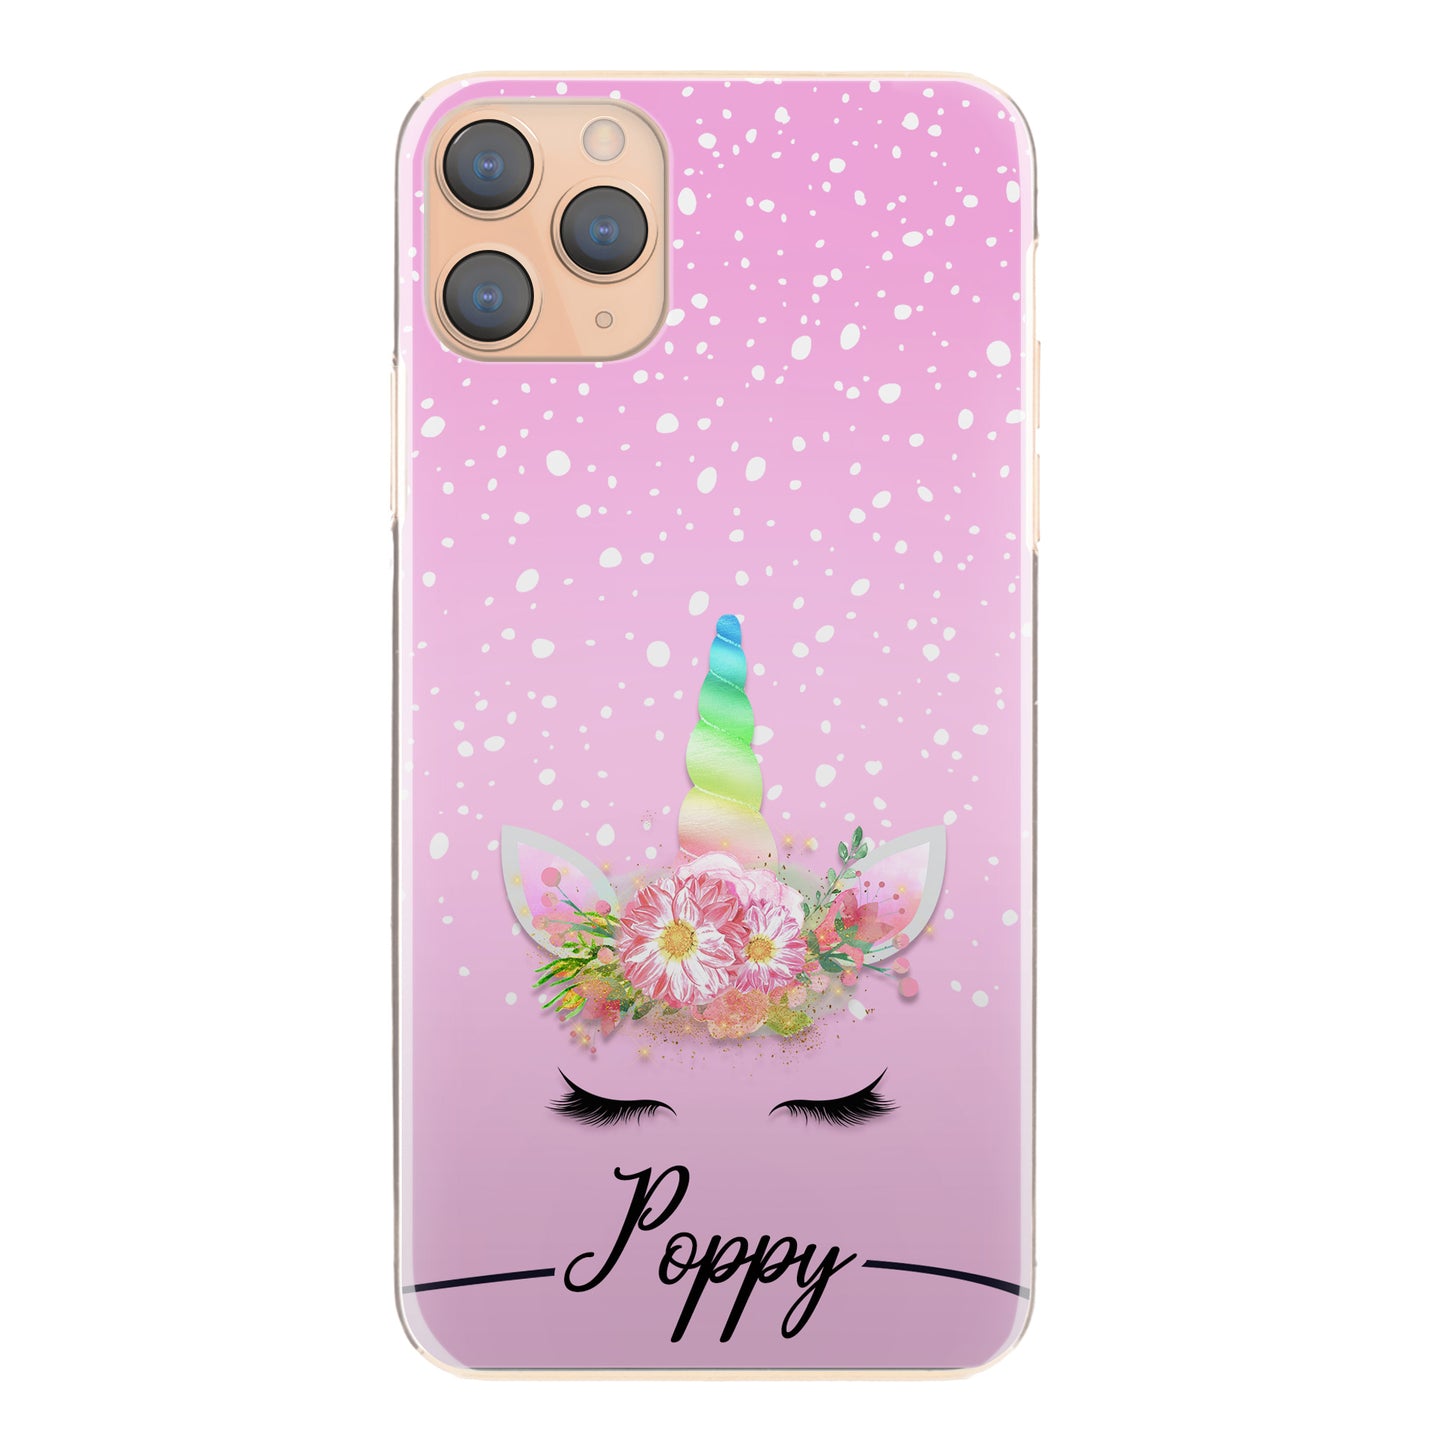 Personalised Google Phone Hard Case with Rainbow Floral Unicorn and Text on Pink